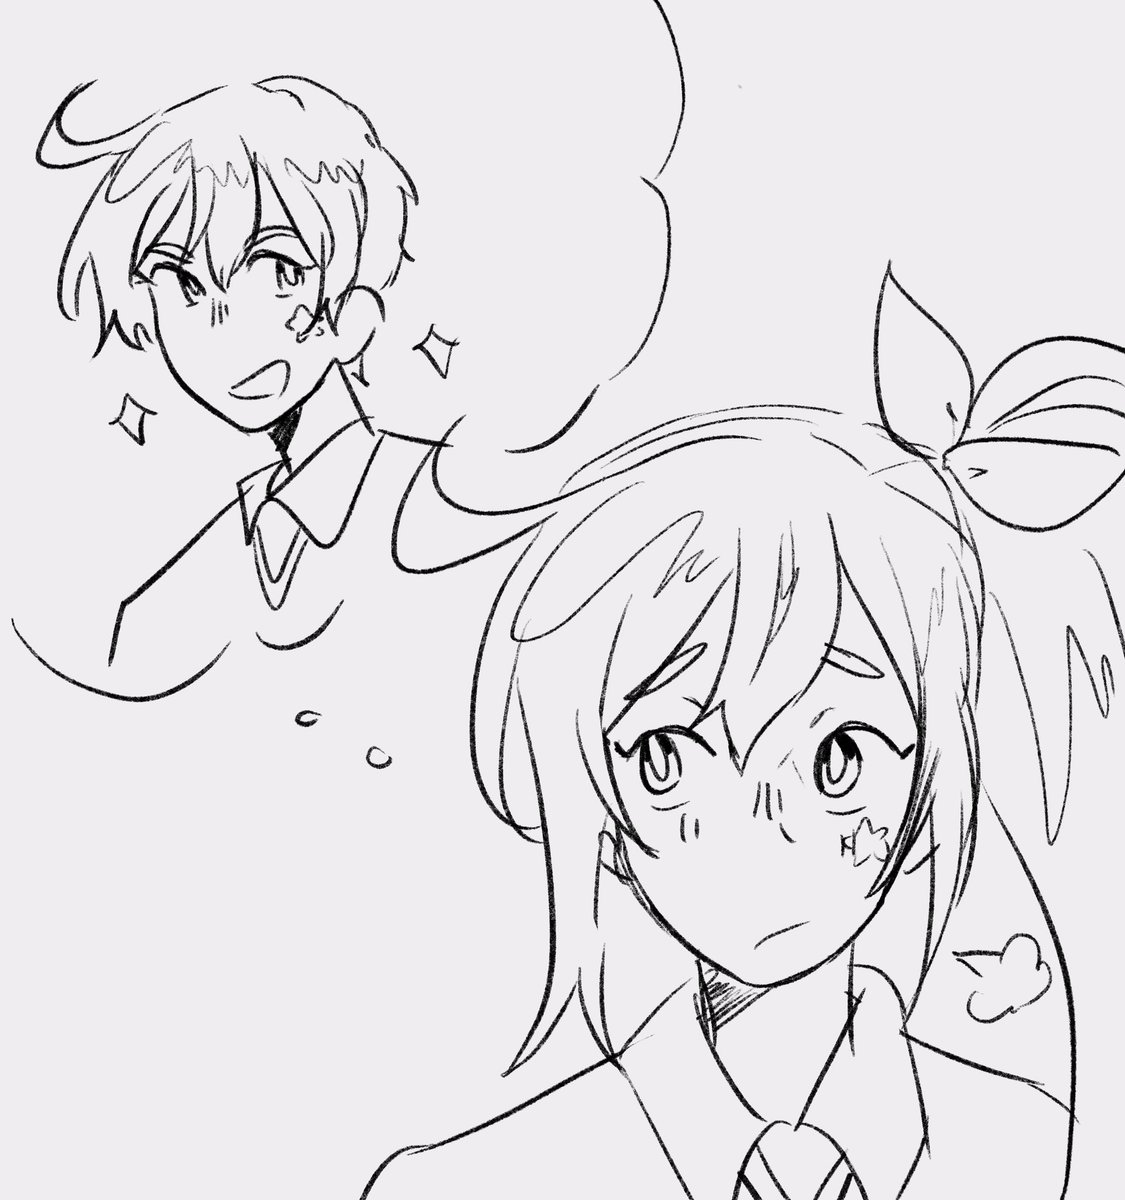 uni (vocaloid) doodles. she's a timid girl who wishes she was more cool and princely 